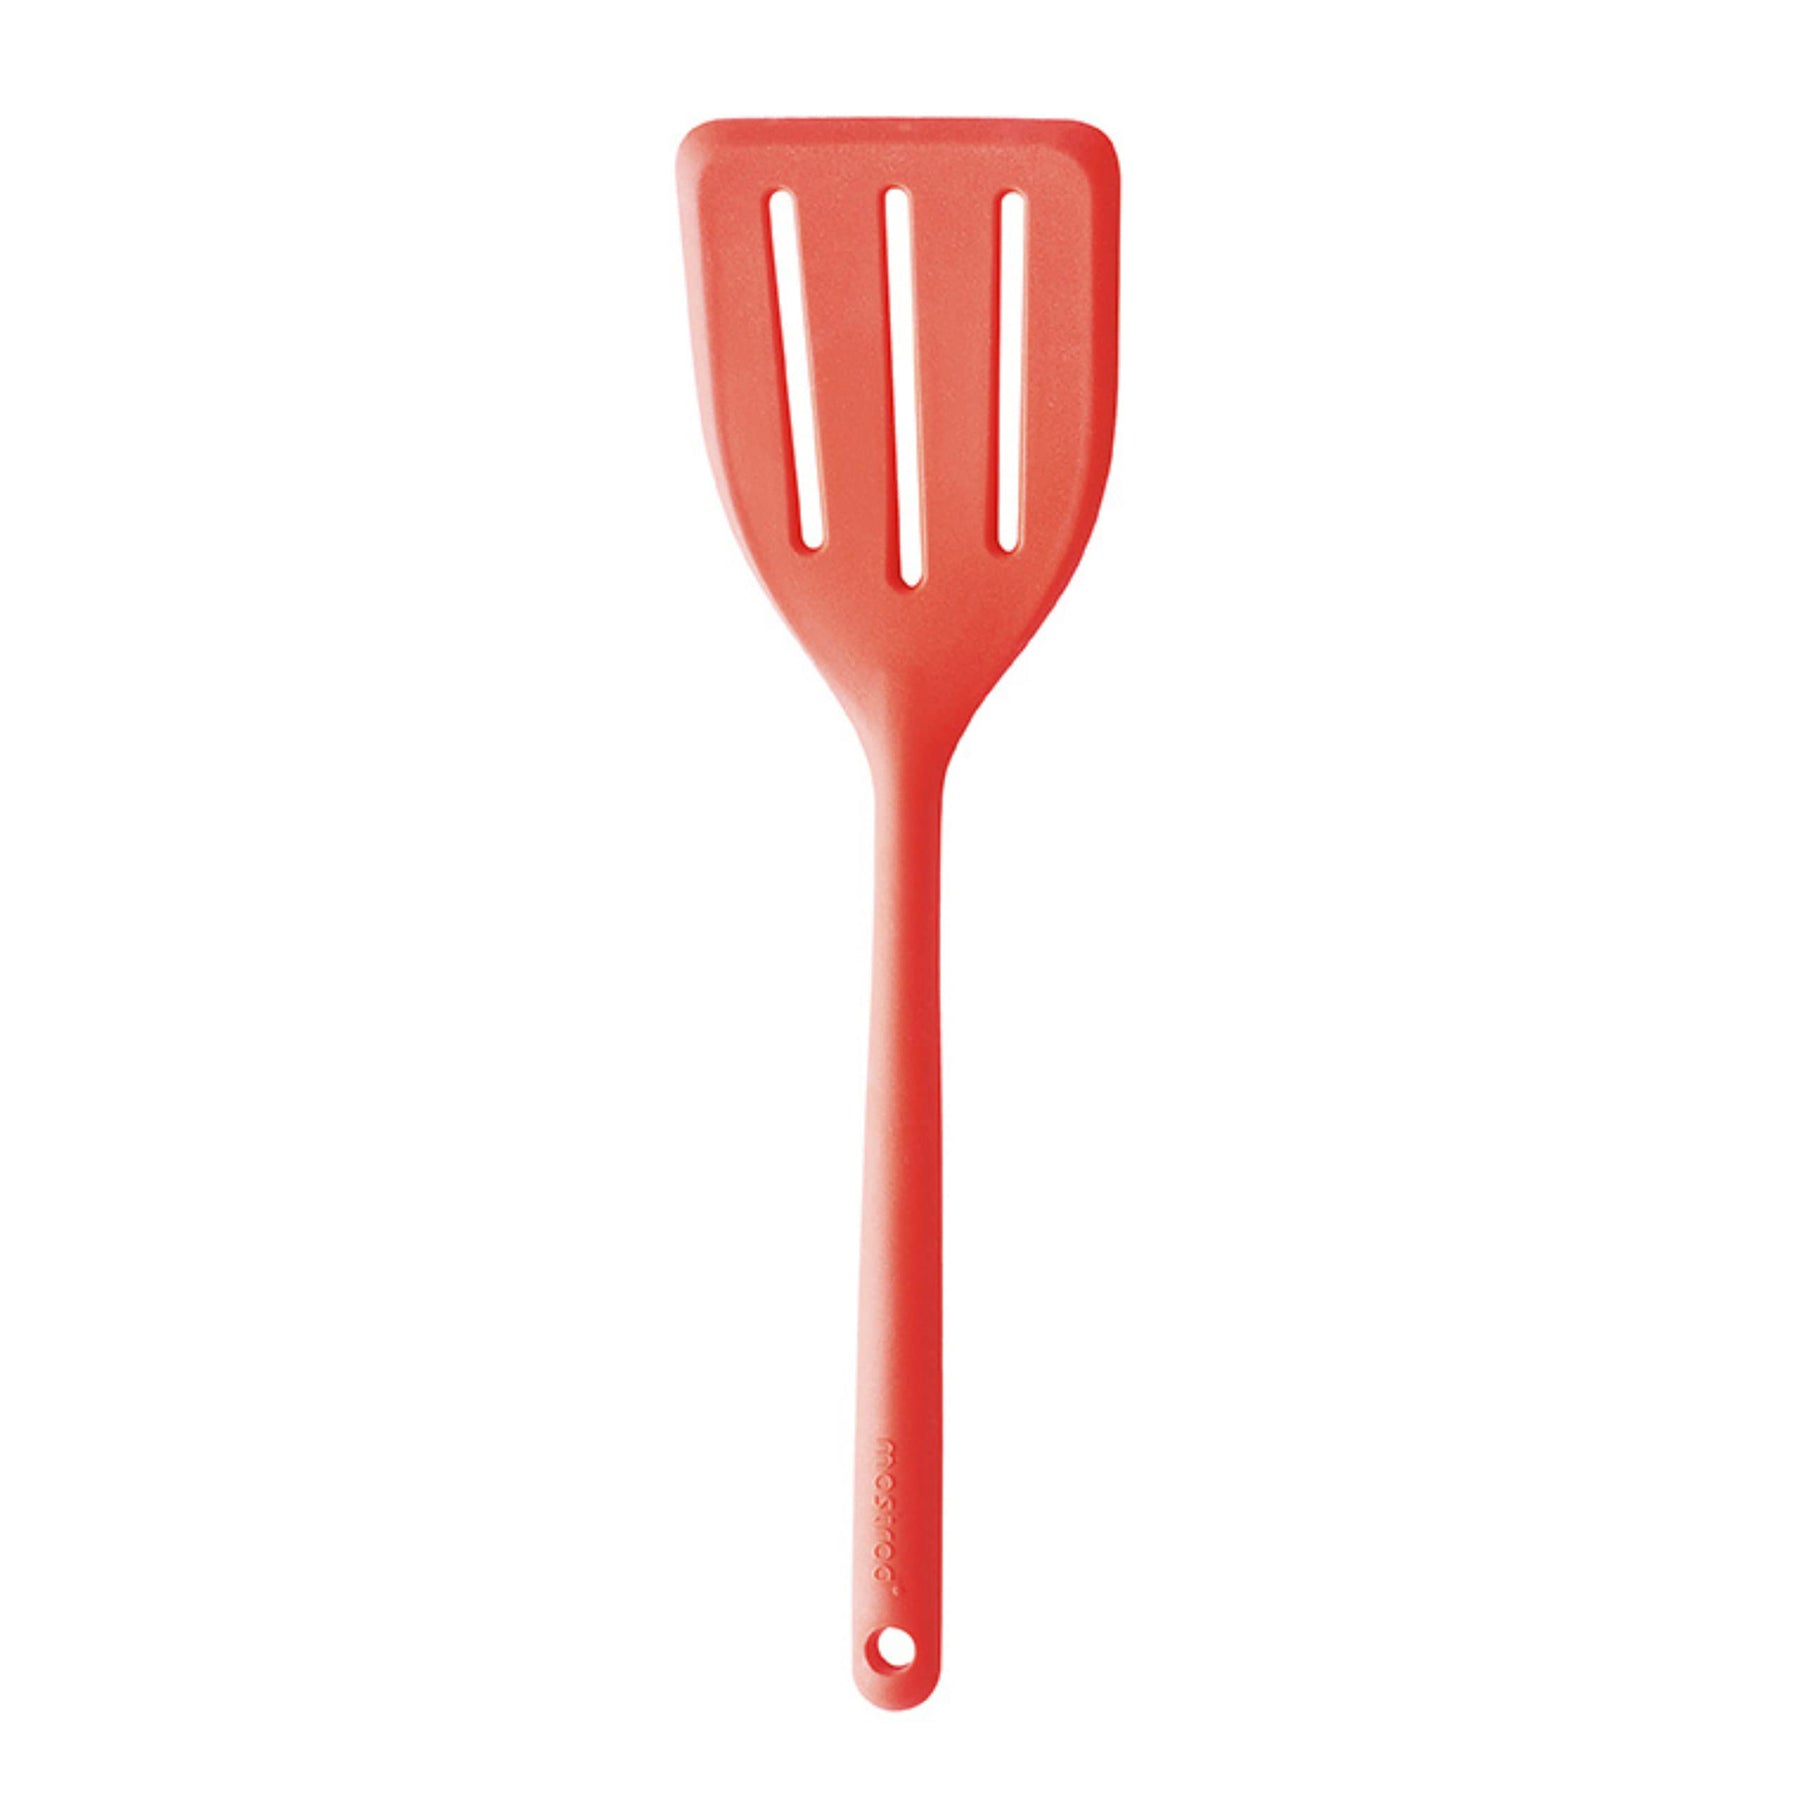 12"L Silicone Turner With Flexible Edge, Red - Designed In France